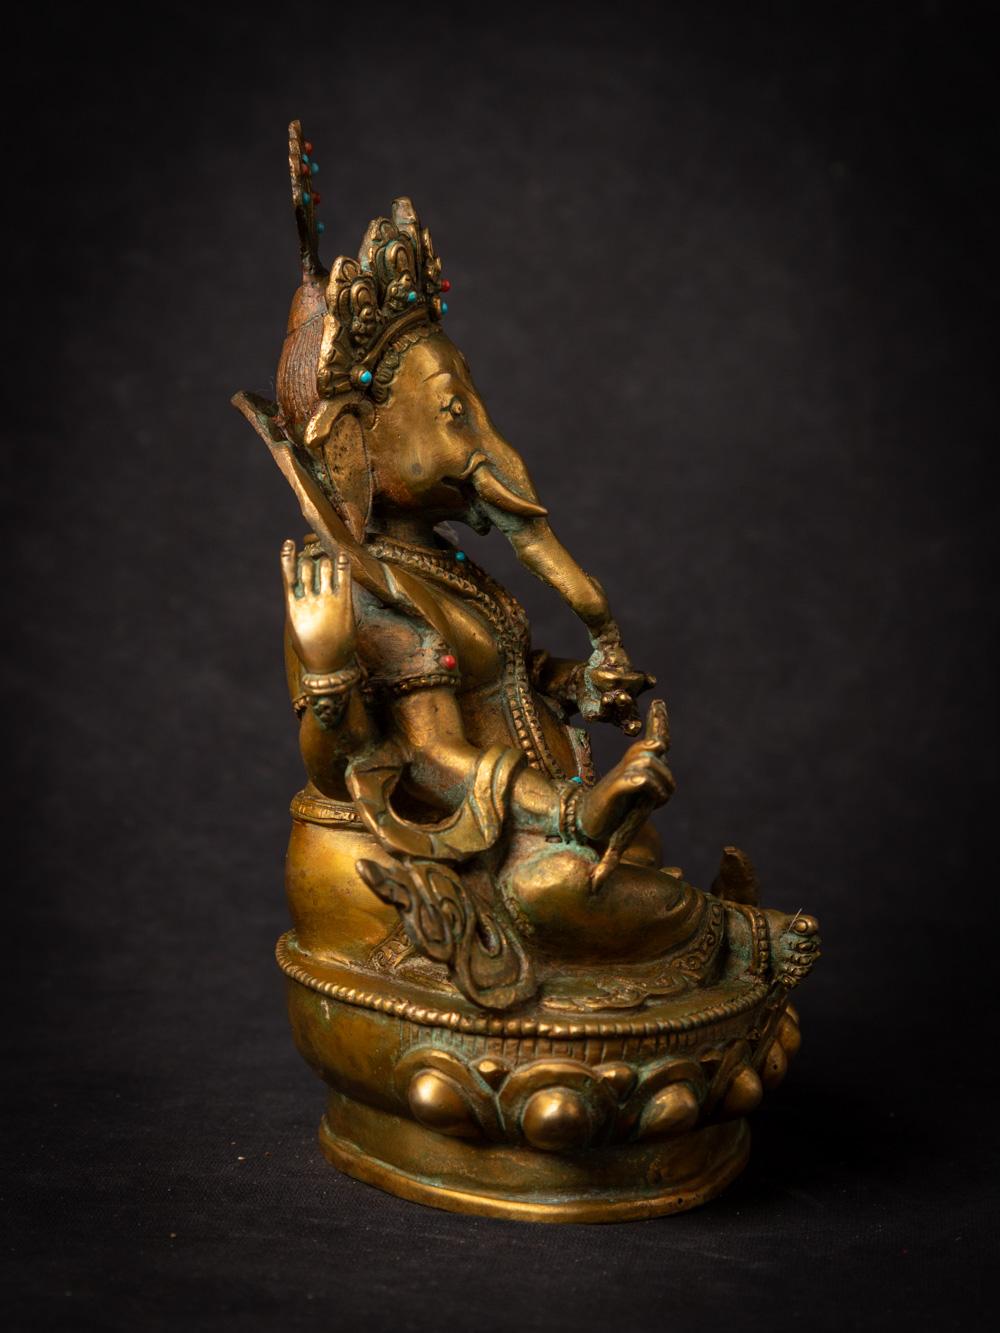 20th Century Middle 20th century old bronze Nepali Ganesha statue fire gold gilded